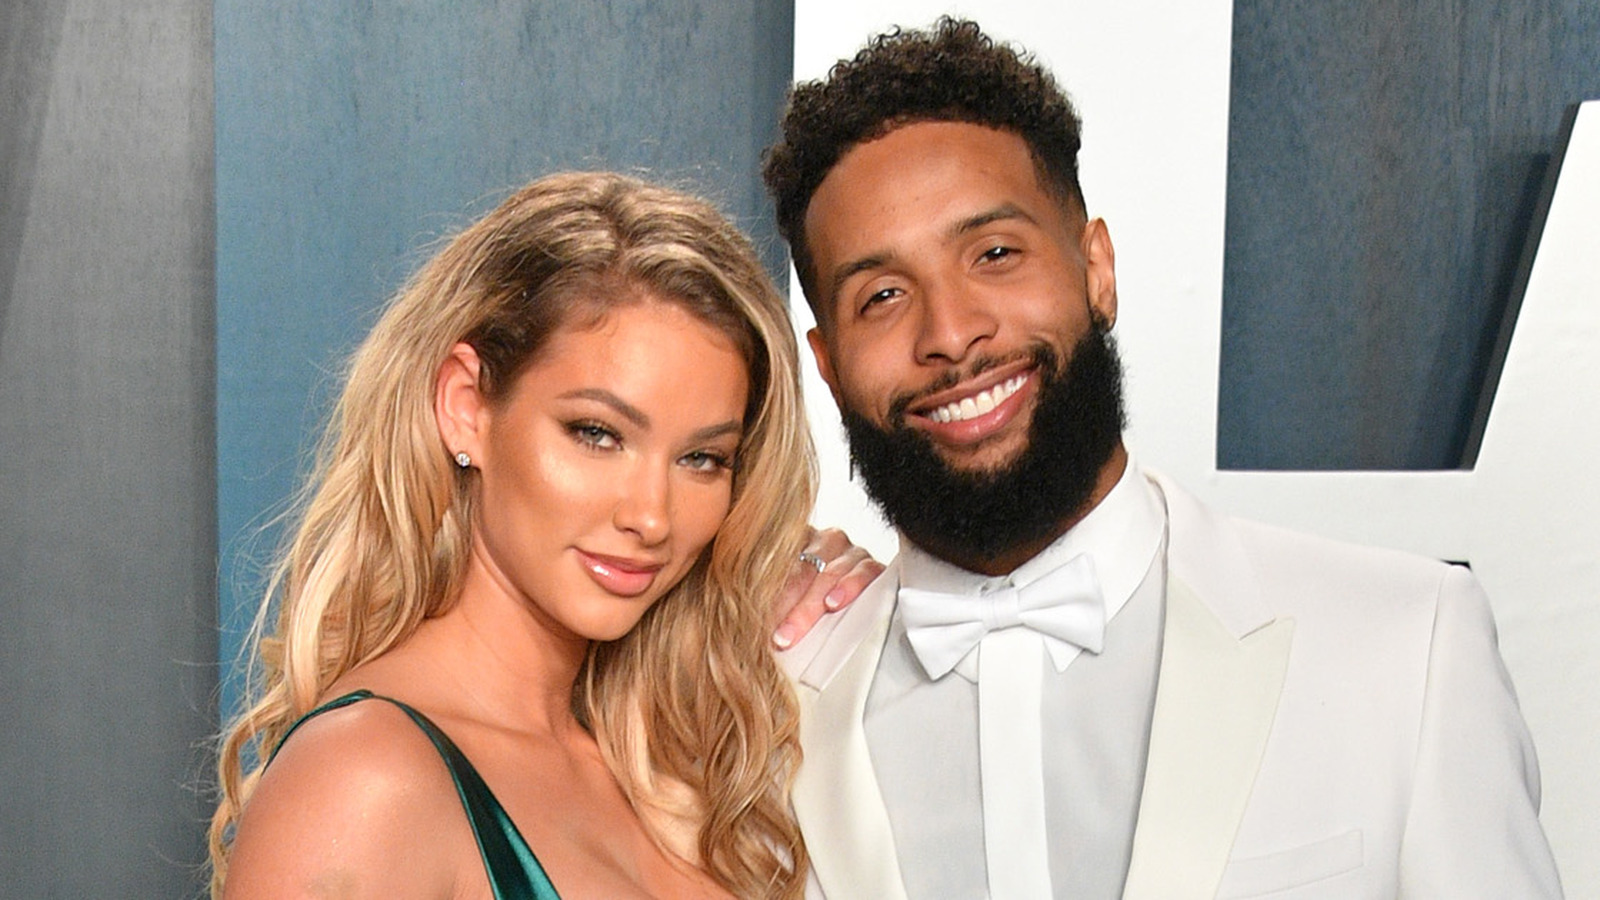 The Truth About Lauren Wood And Odell Beckham Jr.'s Relationship - Nic...